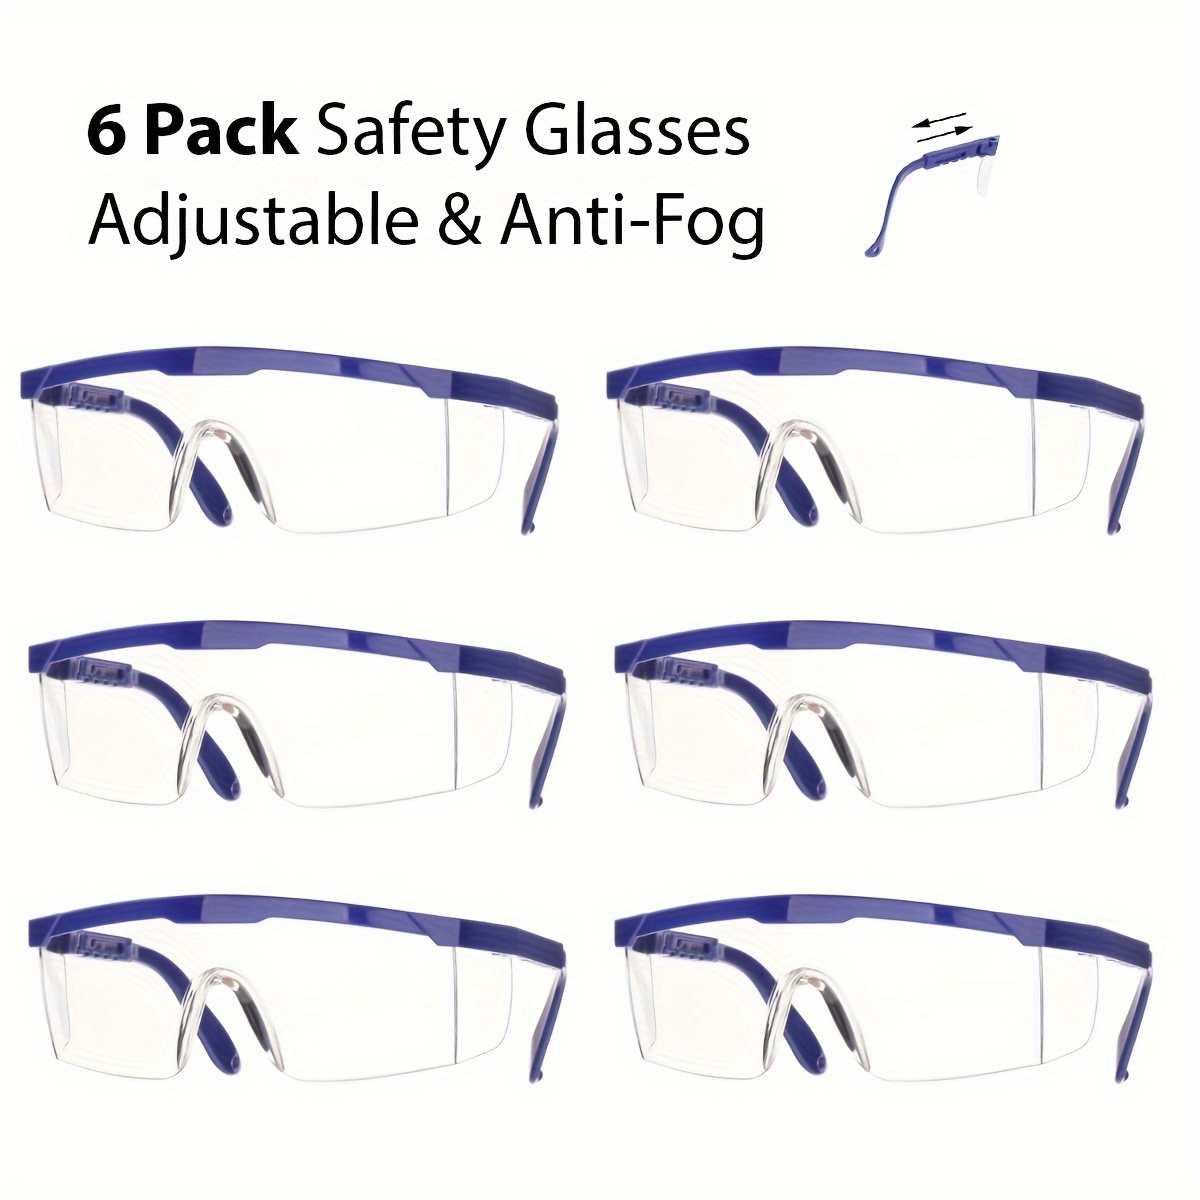 

6 Pack/12 Pack Safety Glasses Adjustable Arms Anti-fog, Eye Protective Glasses, Dust-proof, Droplets-proof, Protective Goggles, Lightweight, Anti-fog Lens, For Industrial Works, Labs, Hospitals